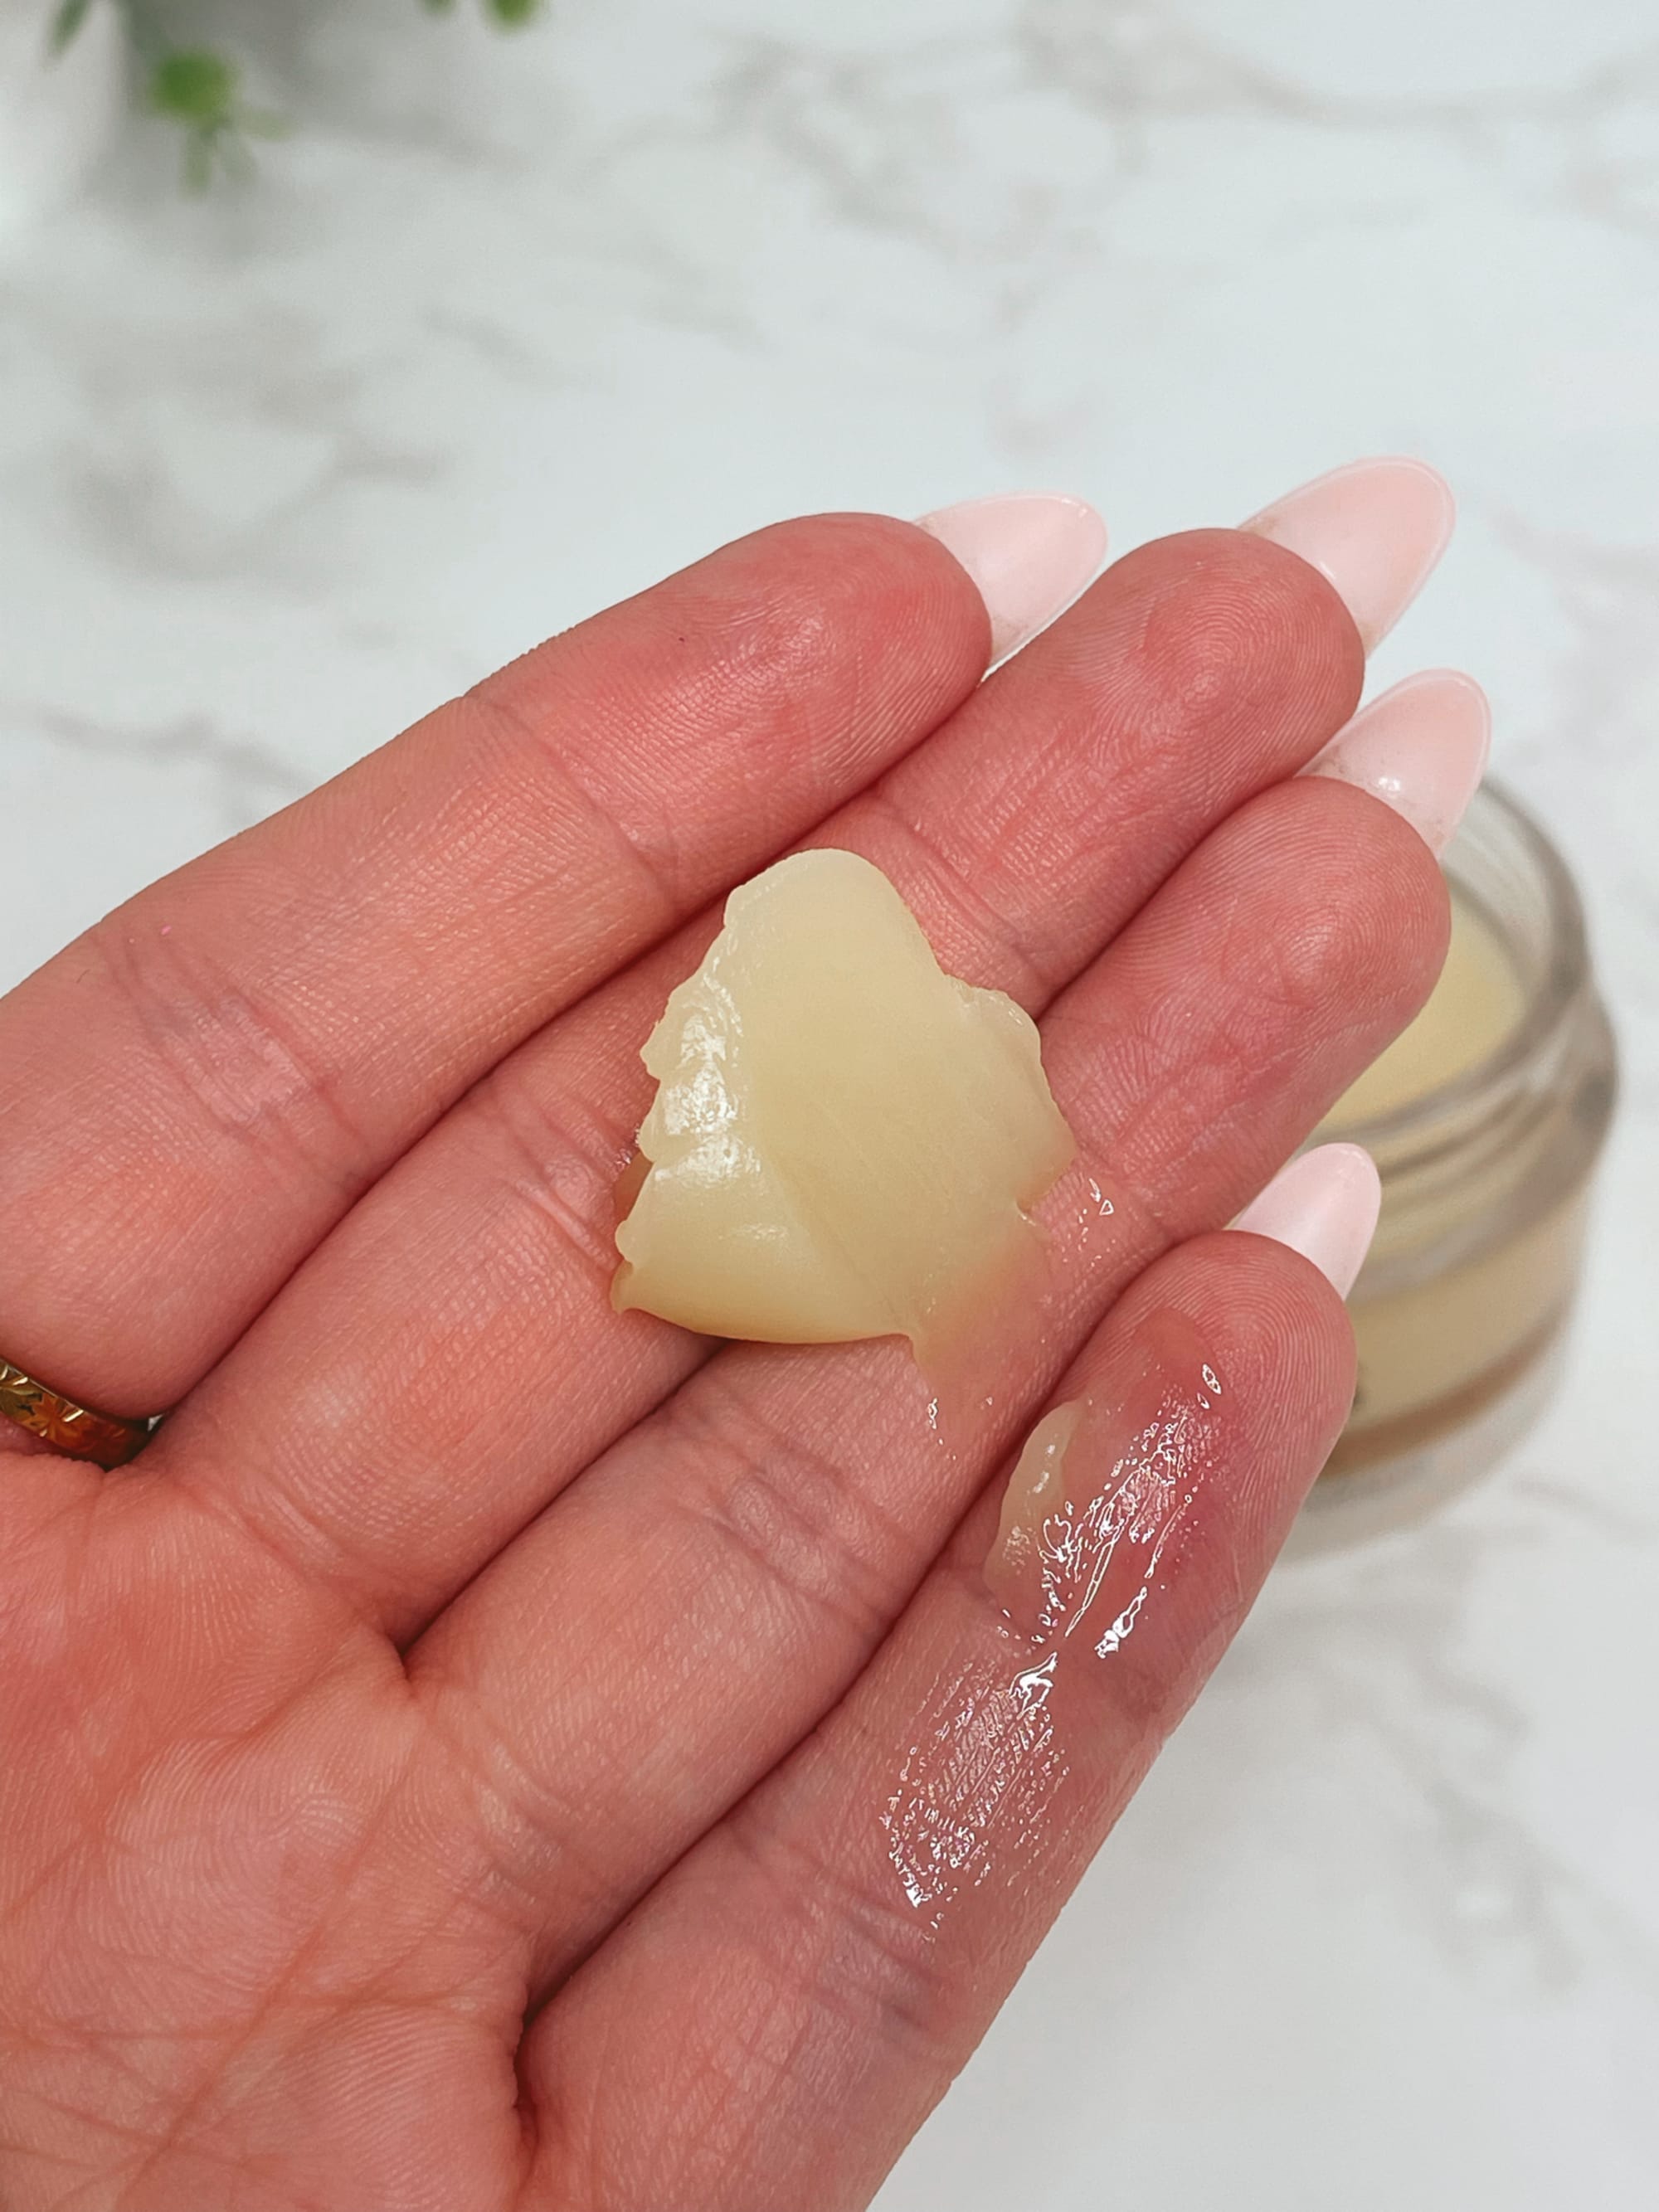 How to Use Elemis Cleansing Balm for an Effective Skin Care Routine